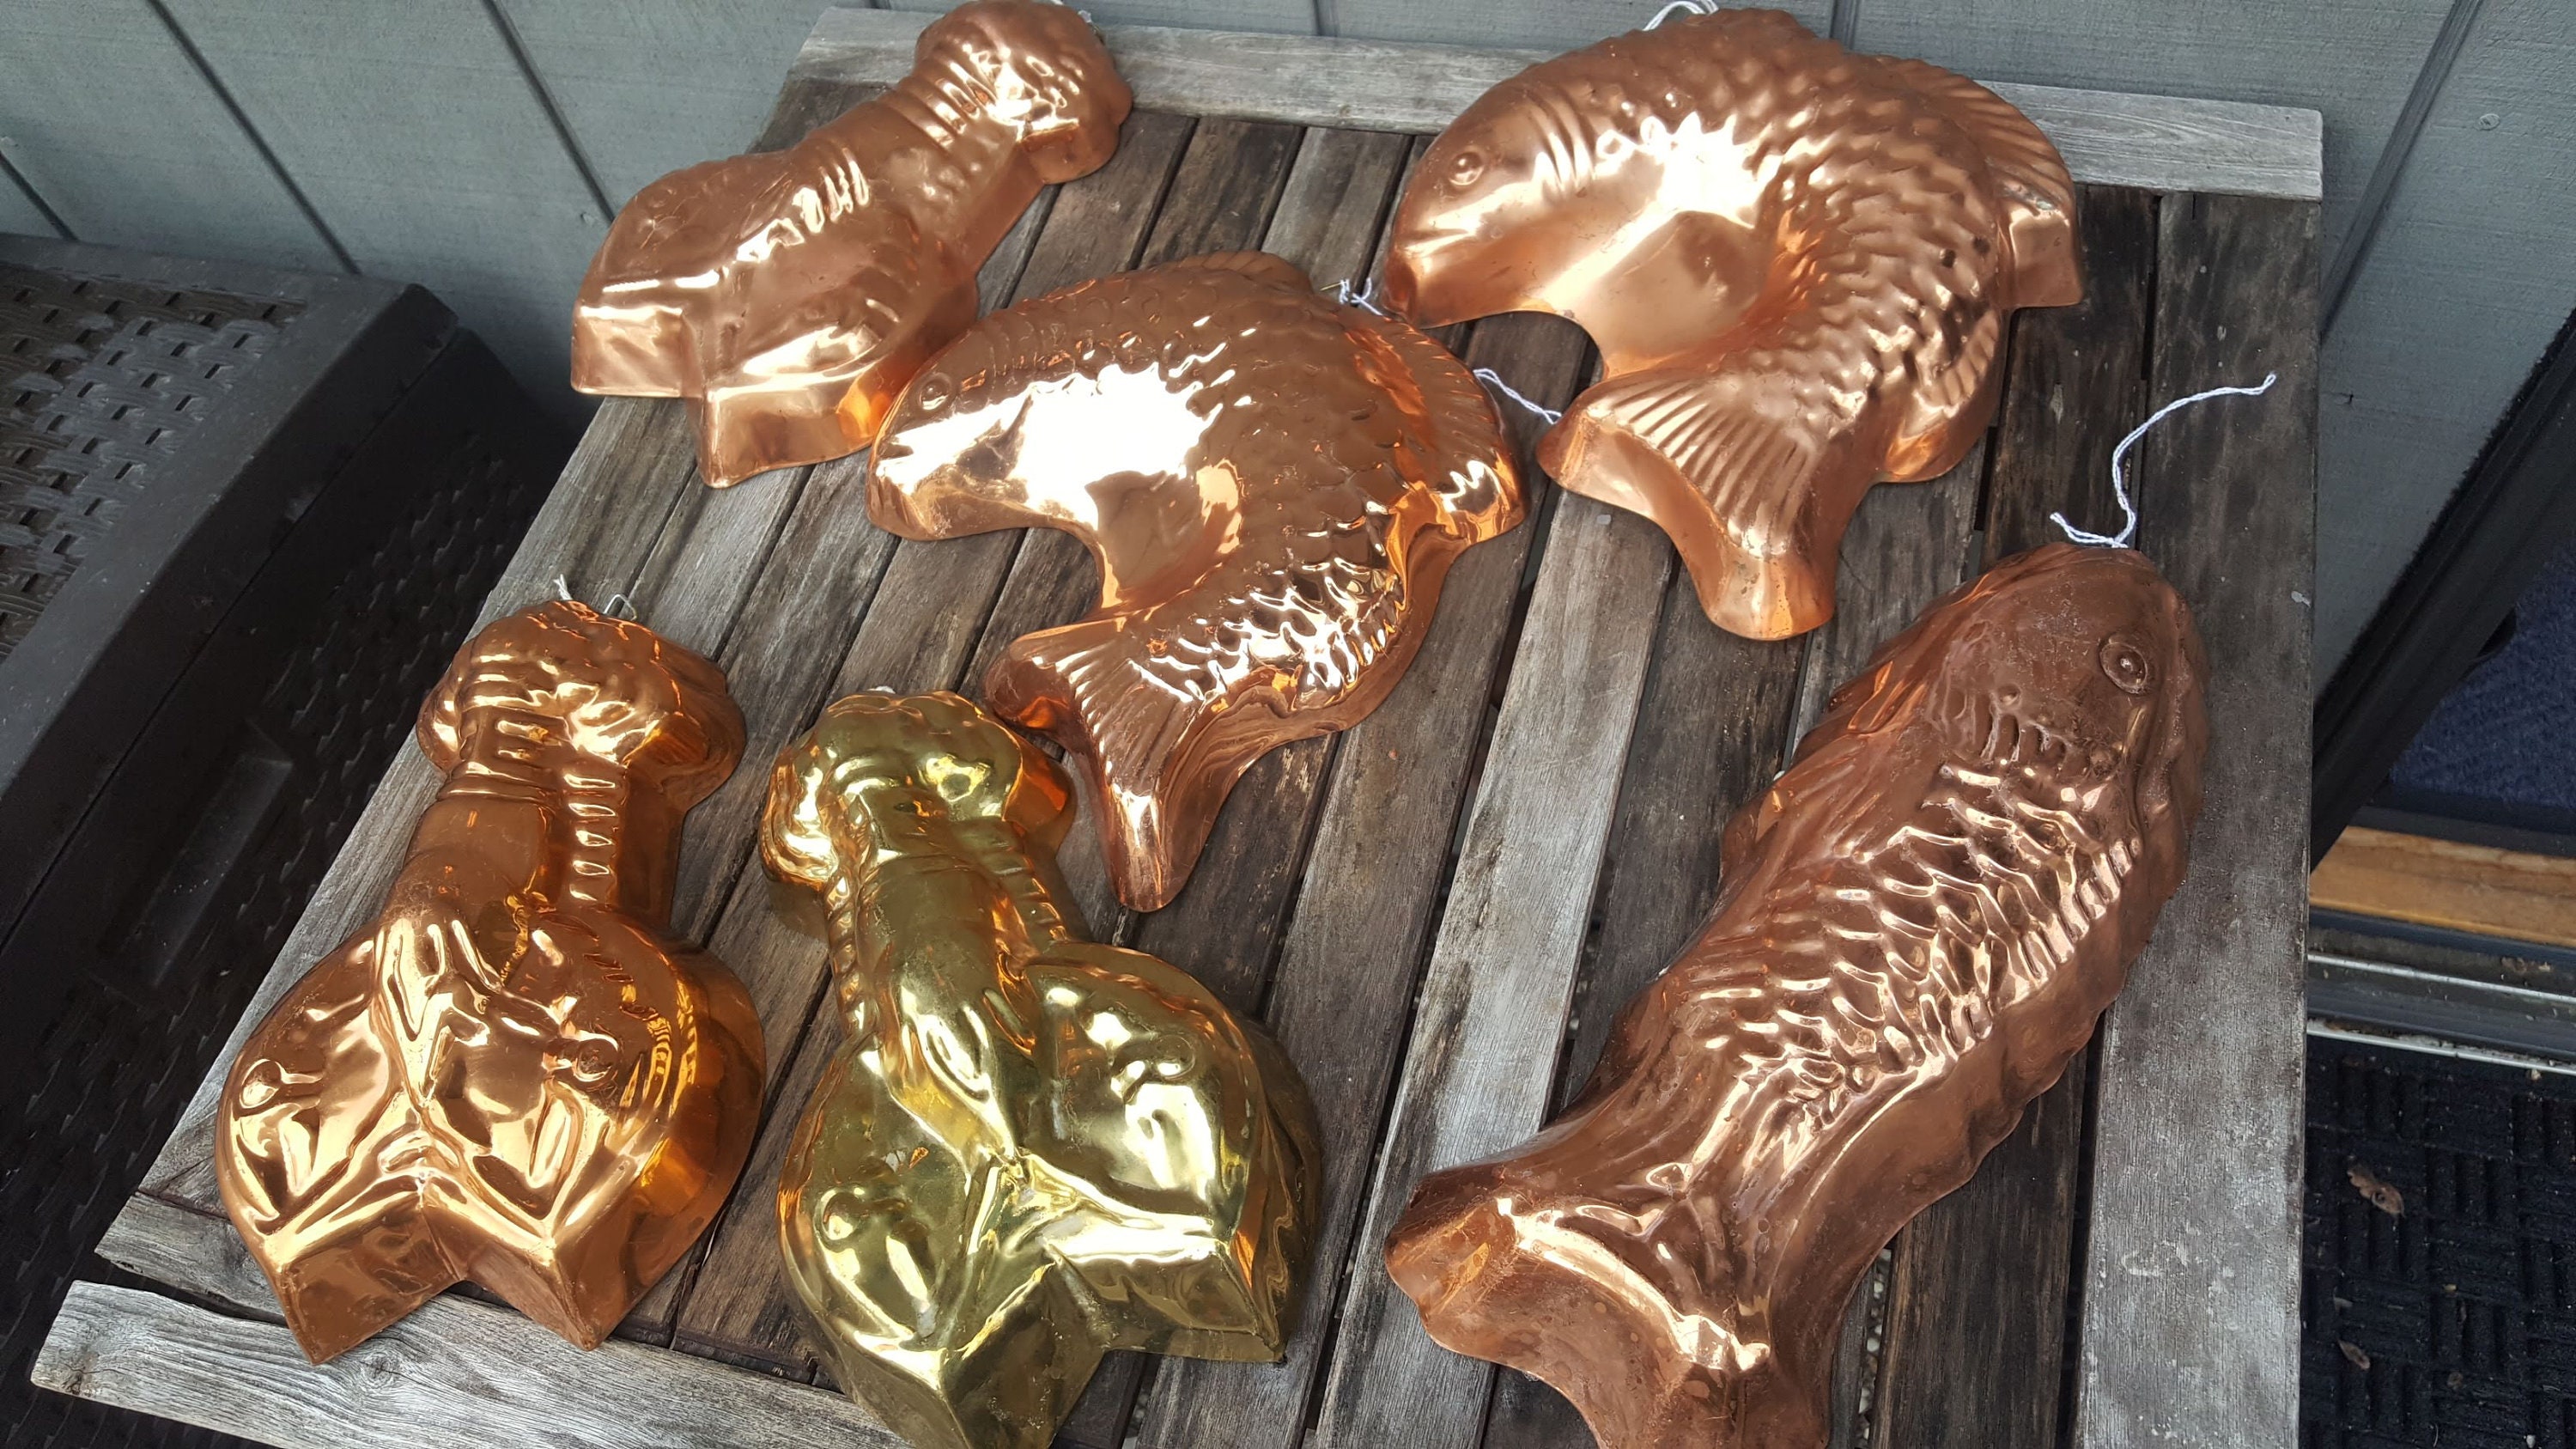 Vintage Copper Fish Wall Hangings, Baking Molds // Daewoo, Korea Or Portugal Seafood Aspic Mold